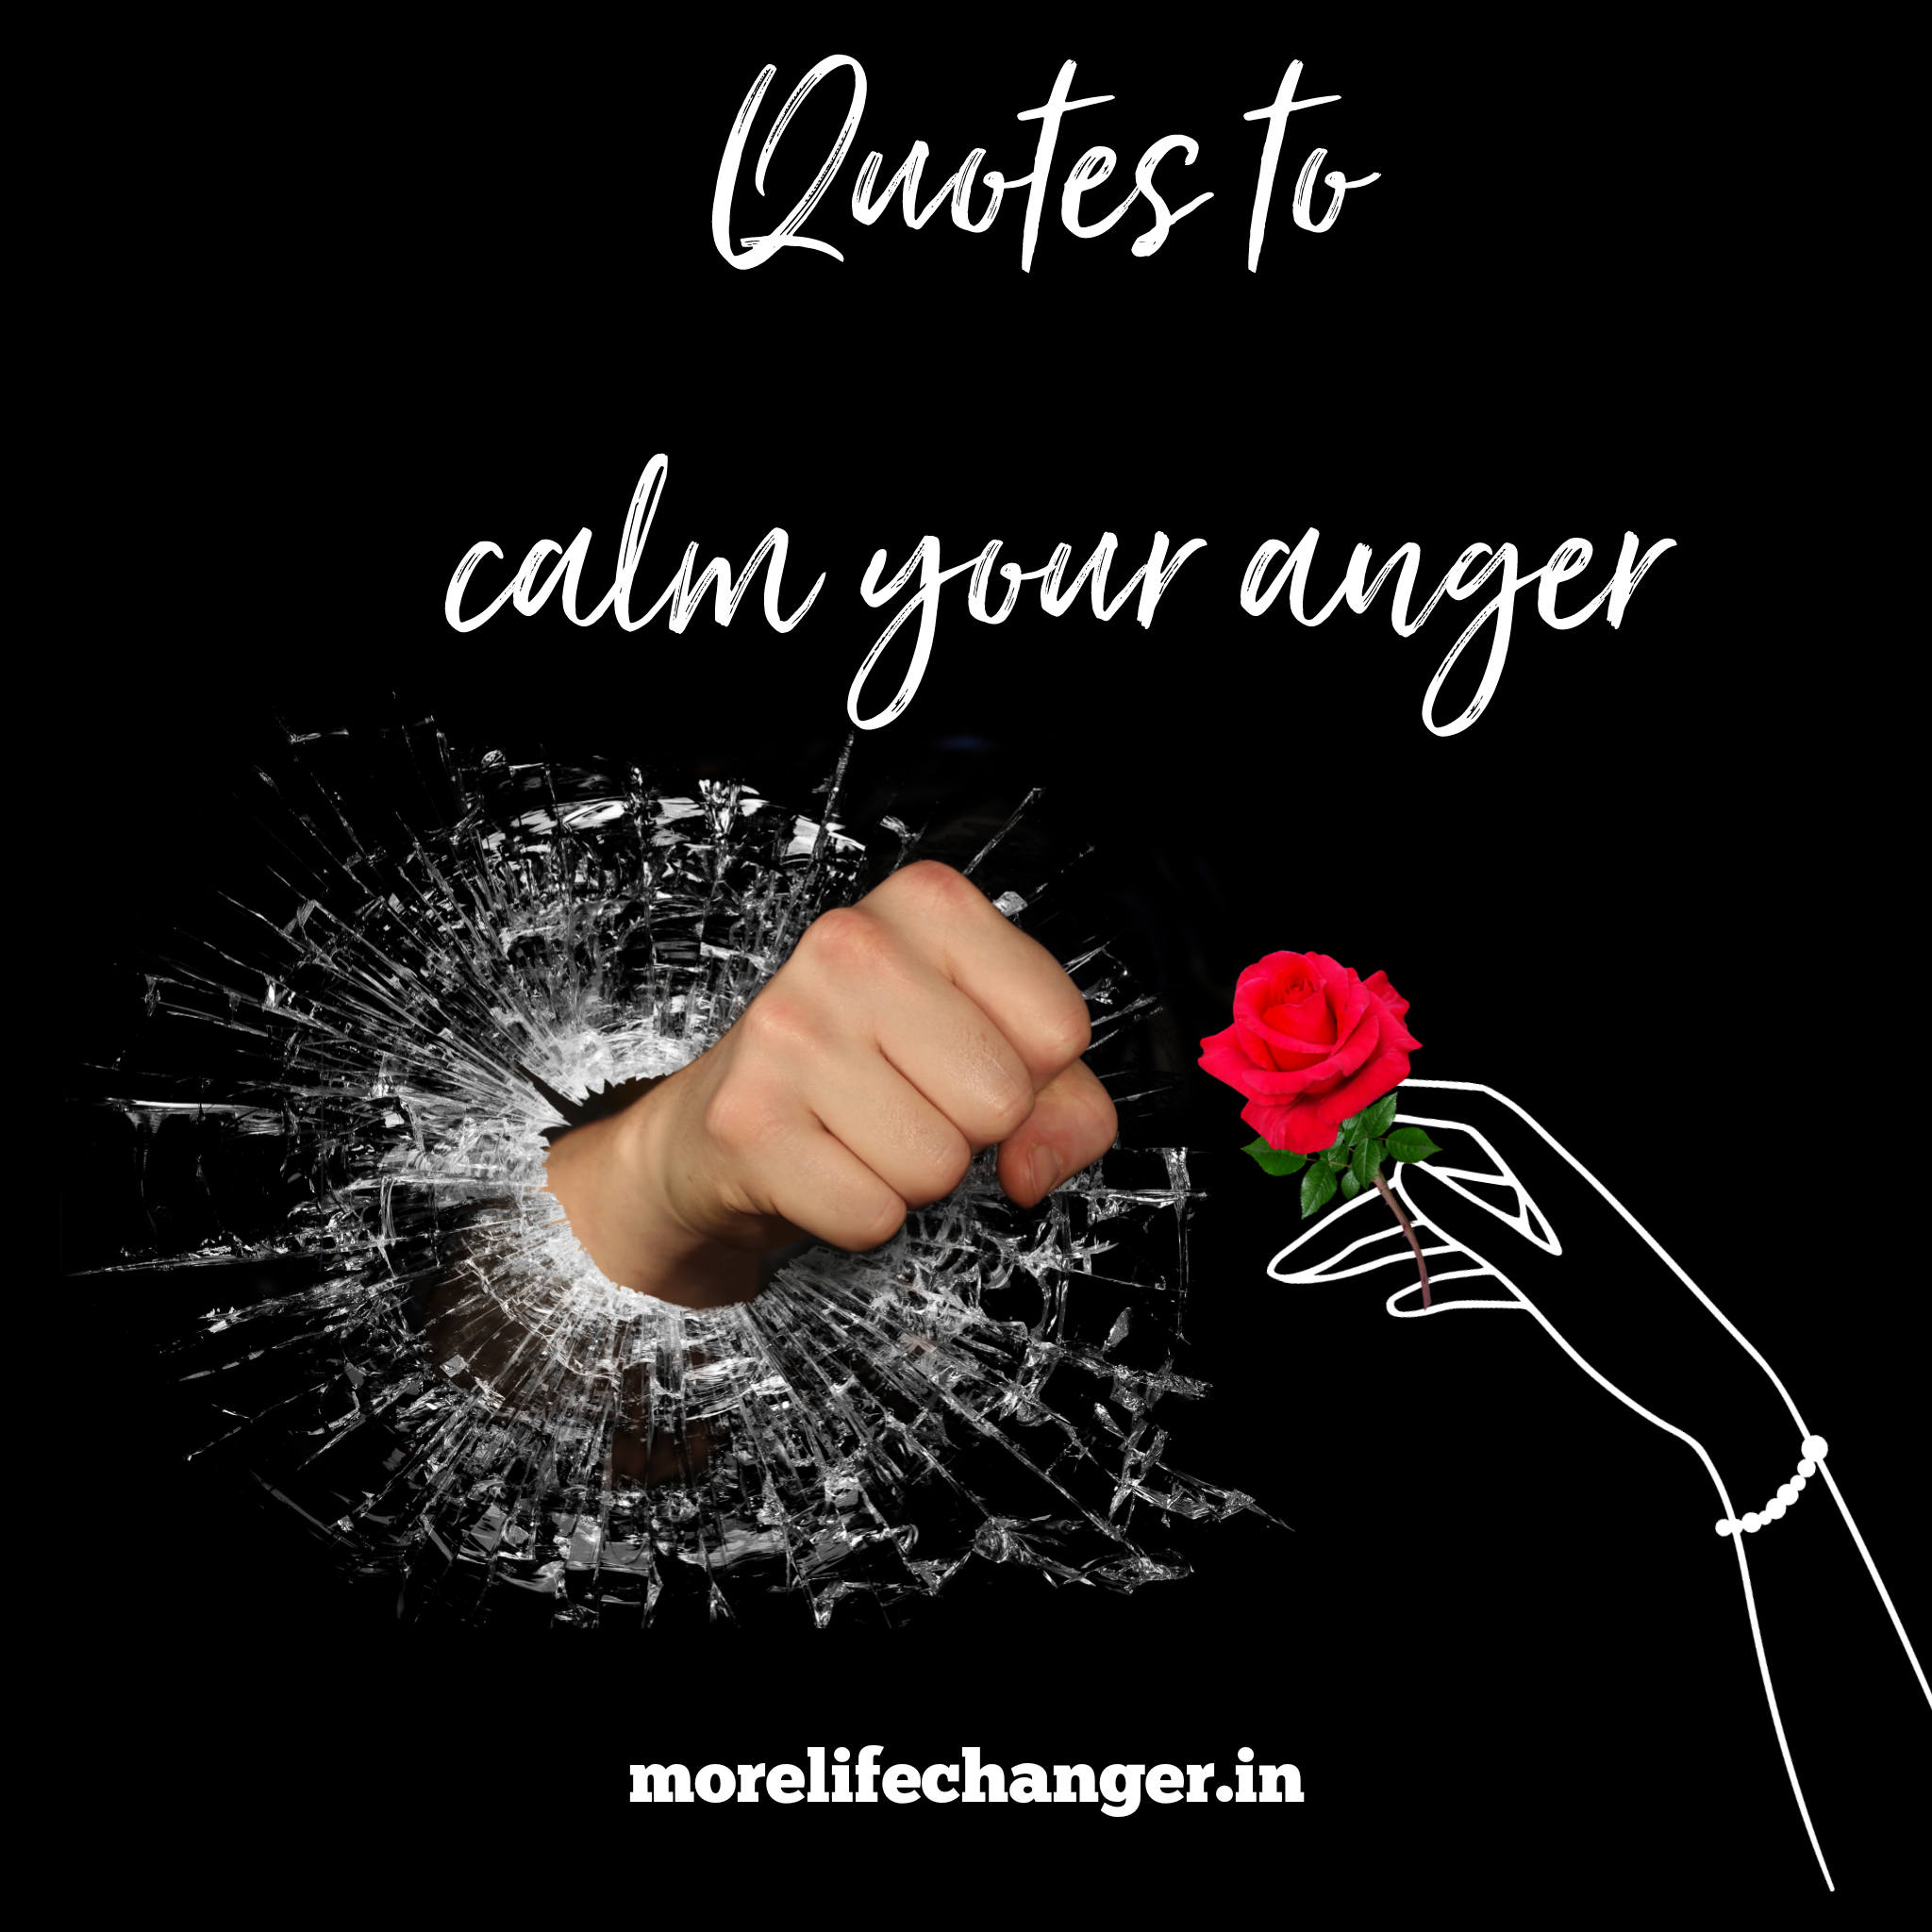 Quotes to calm anger